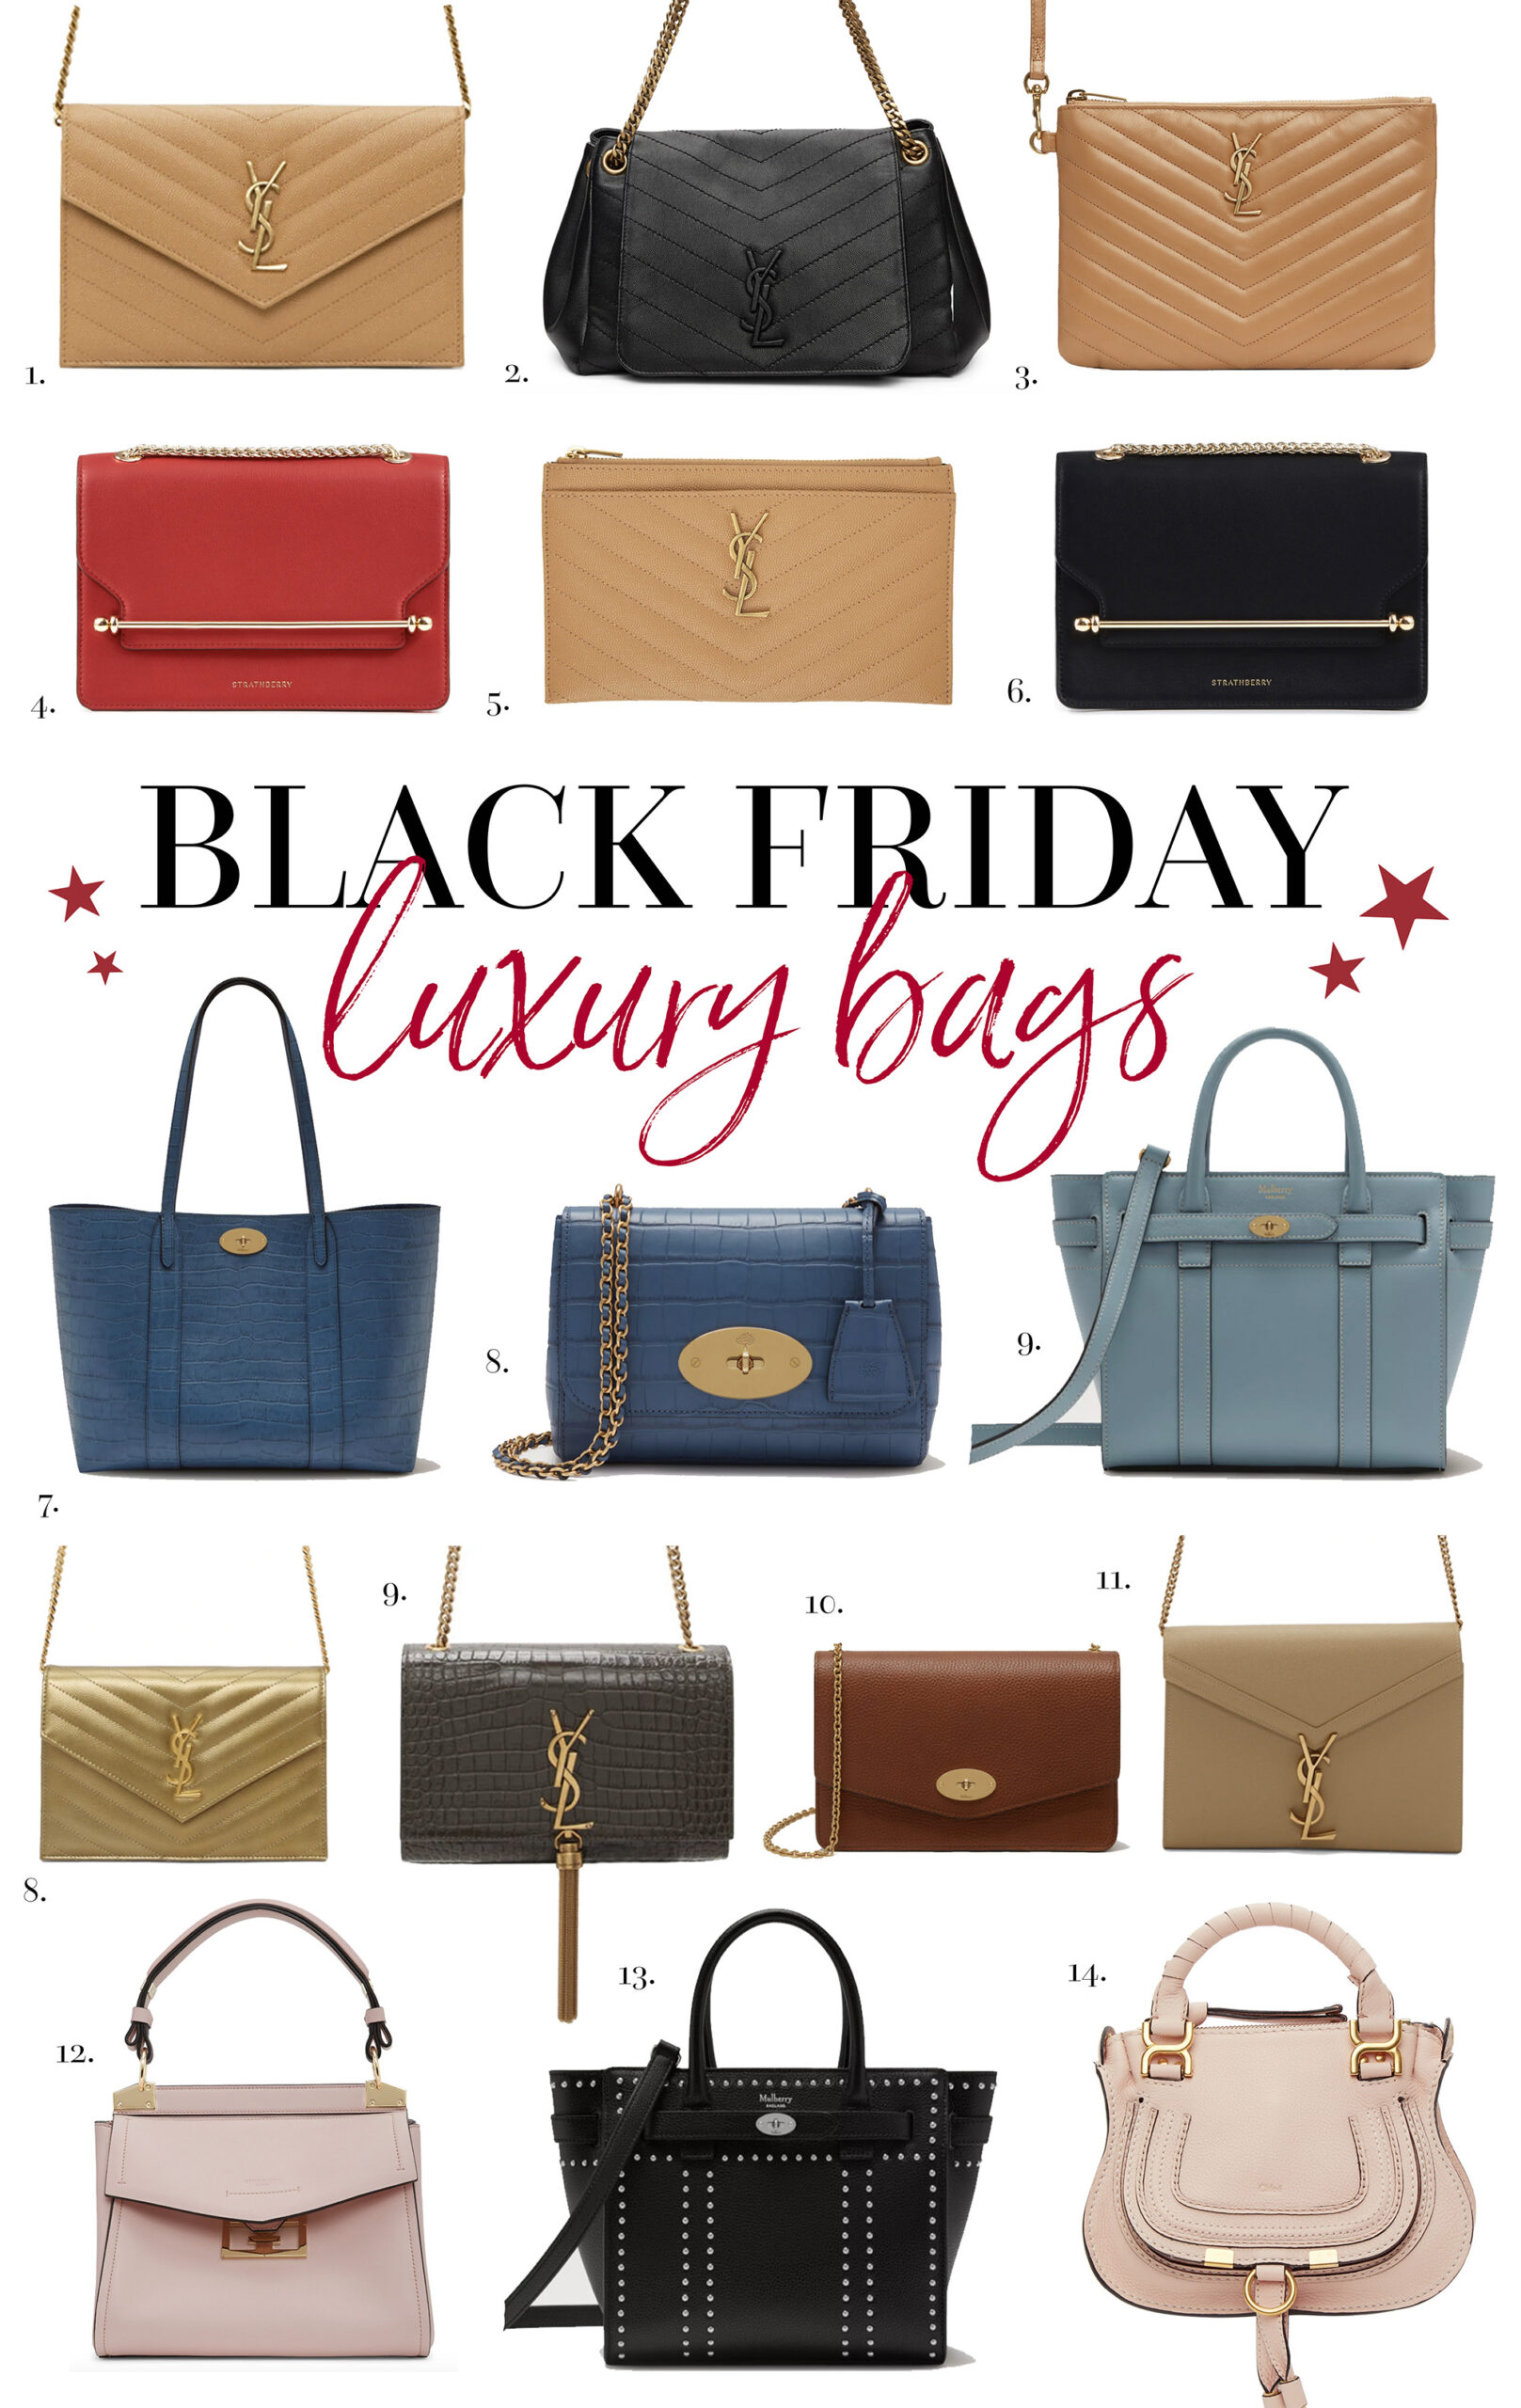 Black Friday / Cyber Monday Sales Event – Daisy Rose bags